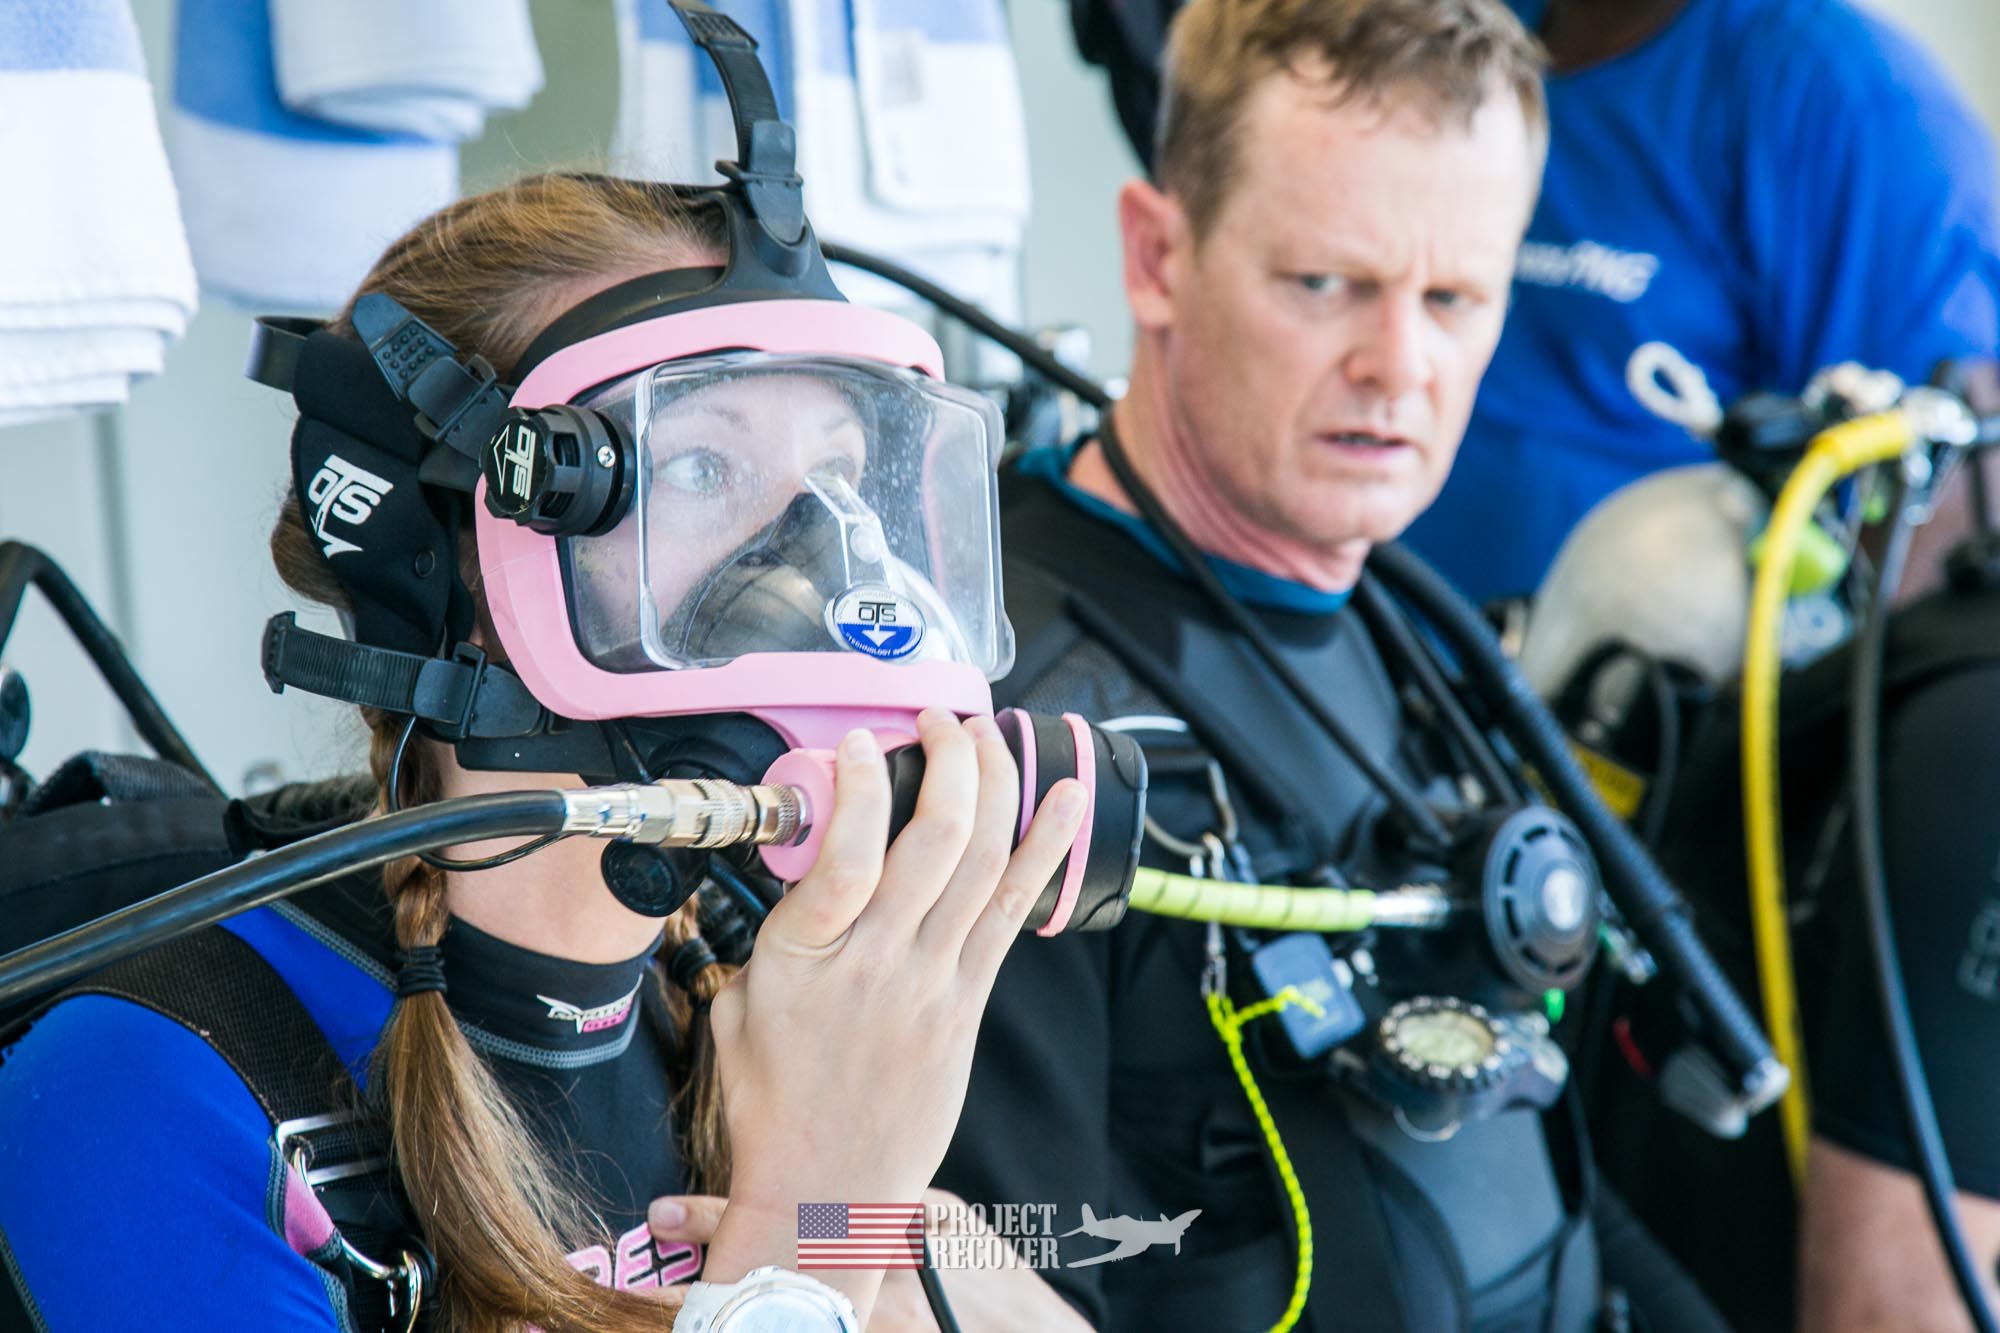 Megan Lickliter-Mundon preparing for Scuba diving MIA crash sites aboard the Taka Live a Board scuba diving ship - Project Recover and BentProp Project are committed to bringing the MIA home. Photos by Harry Parker Photography.com